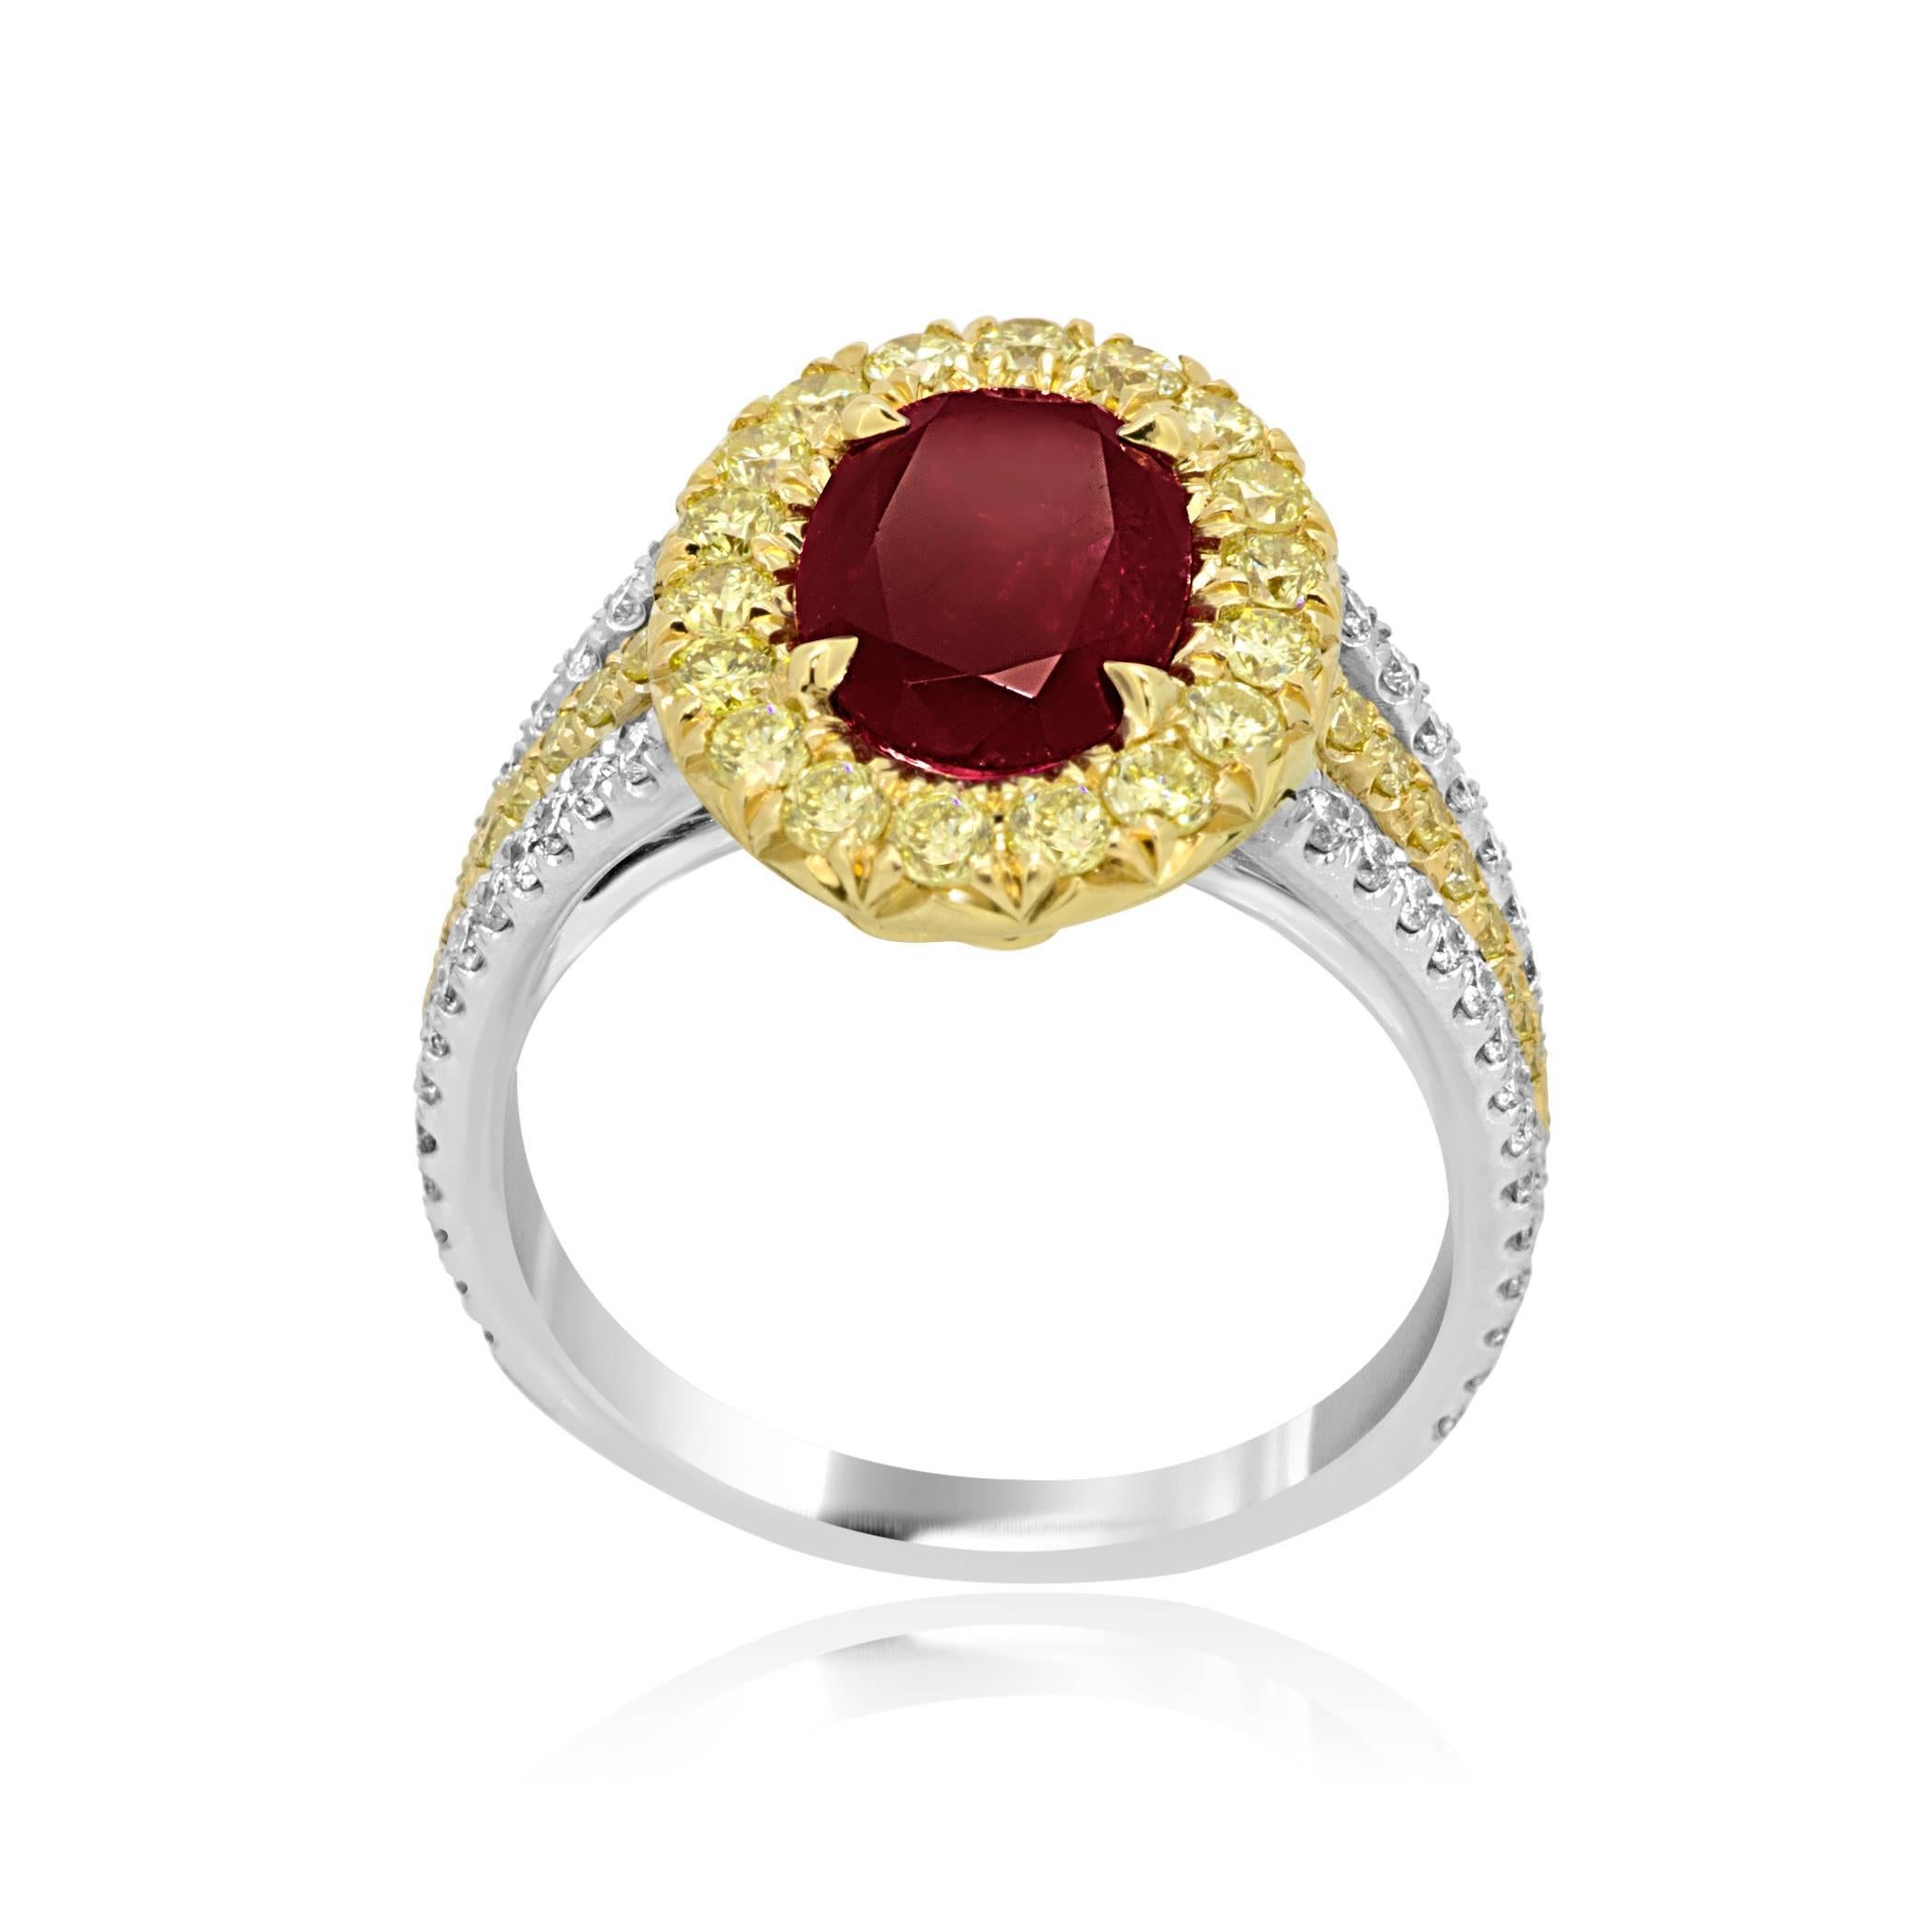 GIA Certified No Heat 1.98 Carat Natural Ruby Big look oval encircled in a halo of Natural Fancy yellow diamond 34 stones weighing 0.67 carat in three prong 18K white and yellow gold ring with white diamonds 56 stones weighing 0.47 carat With three